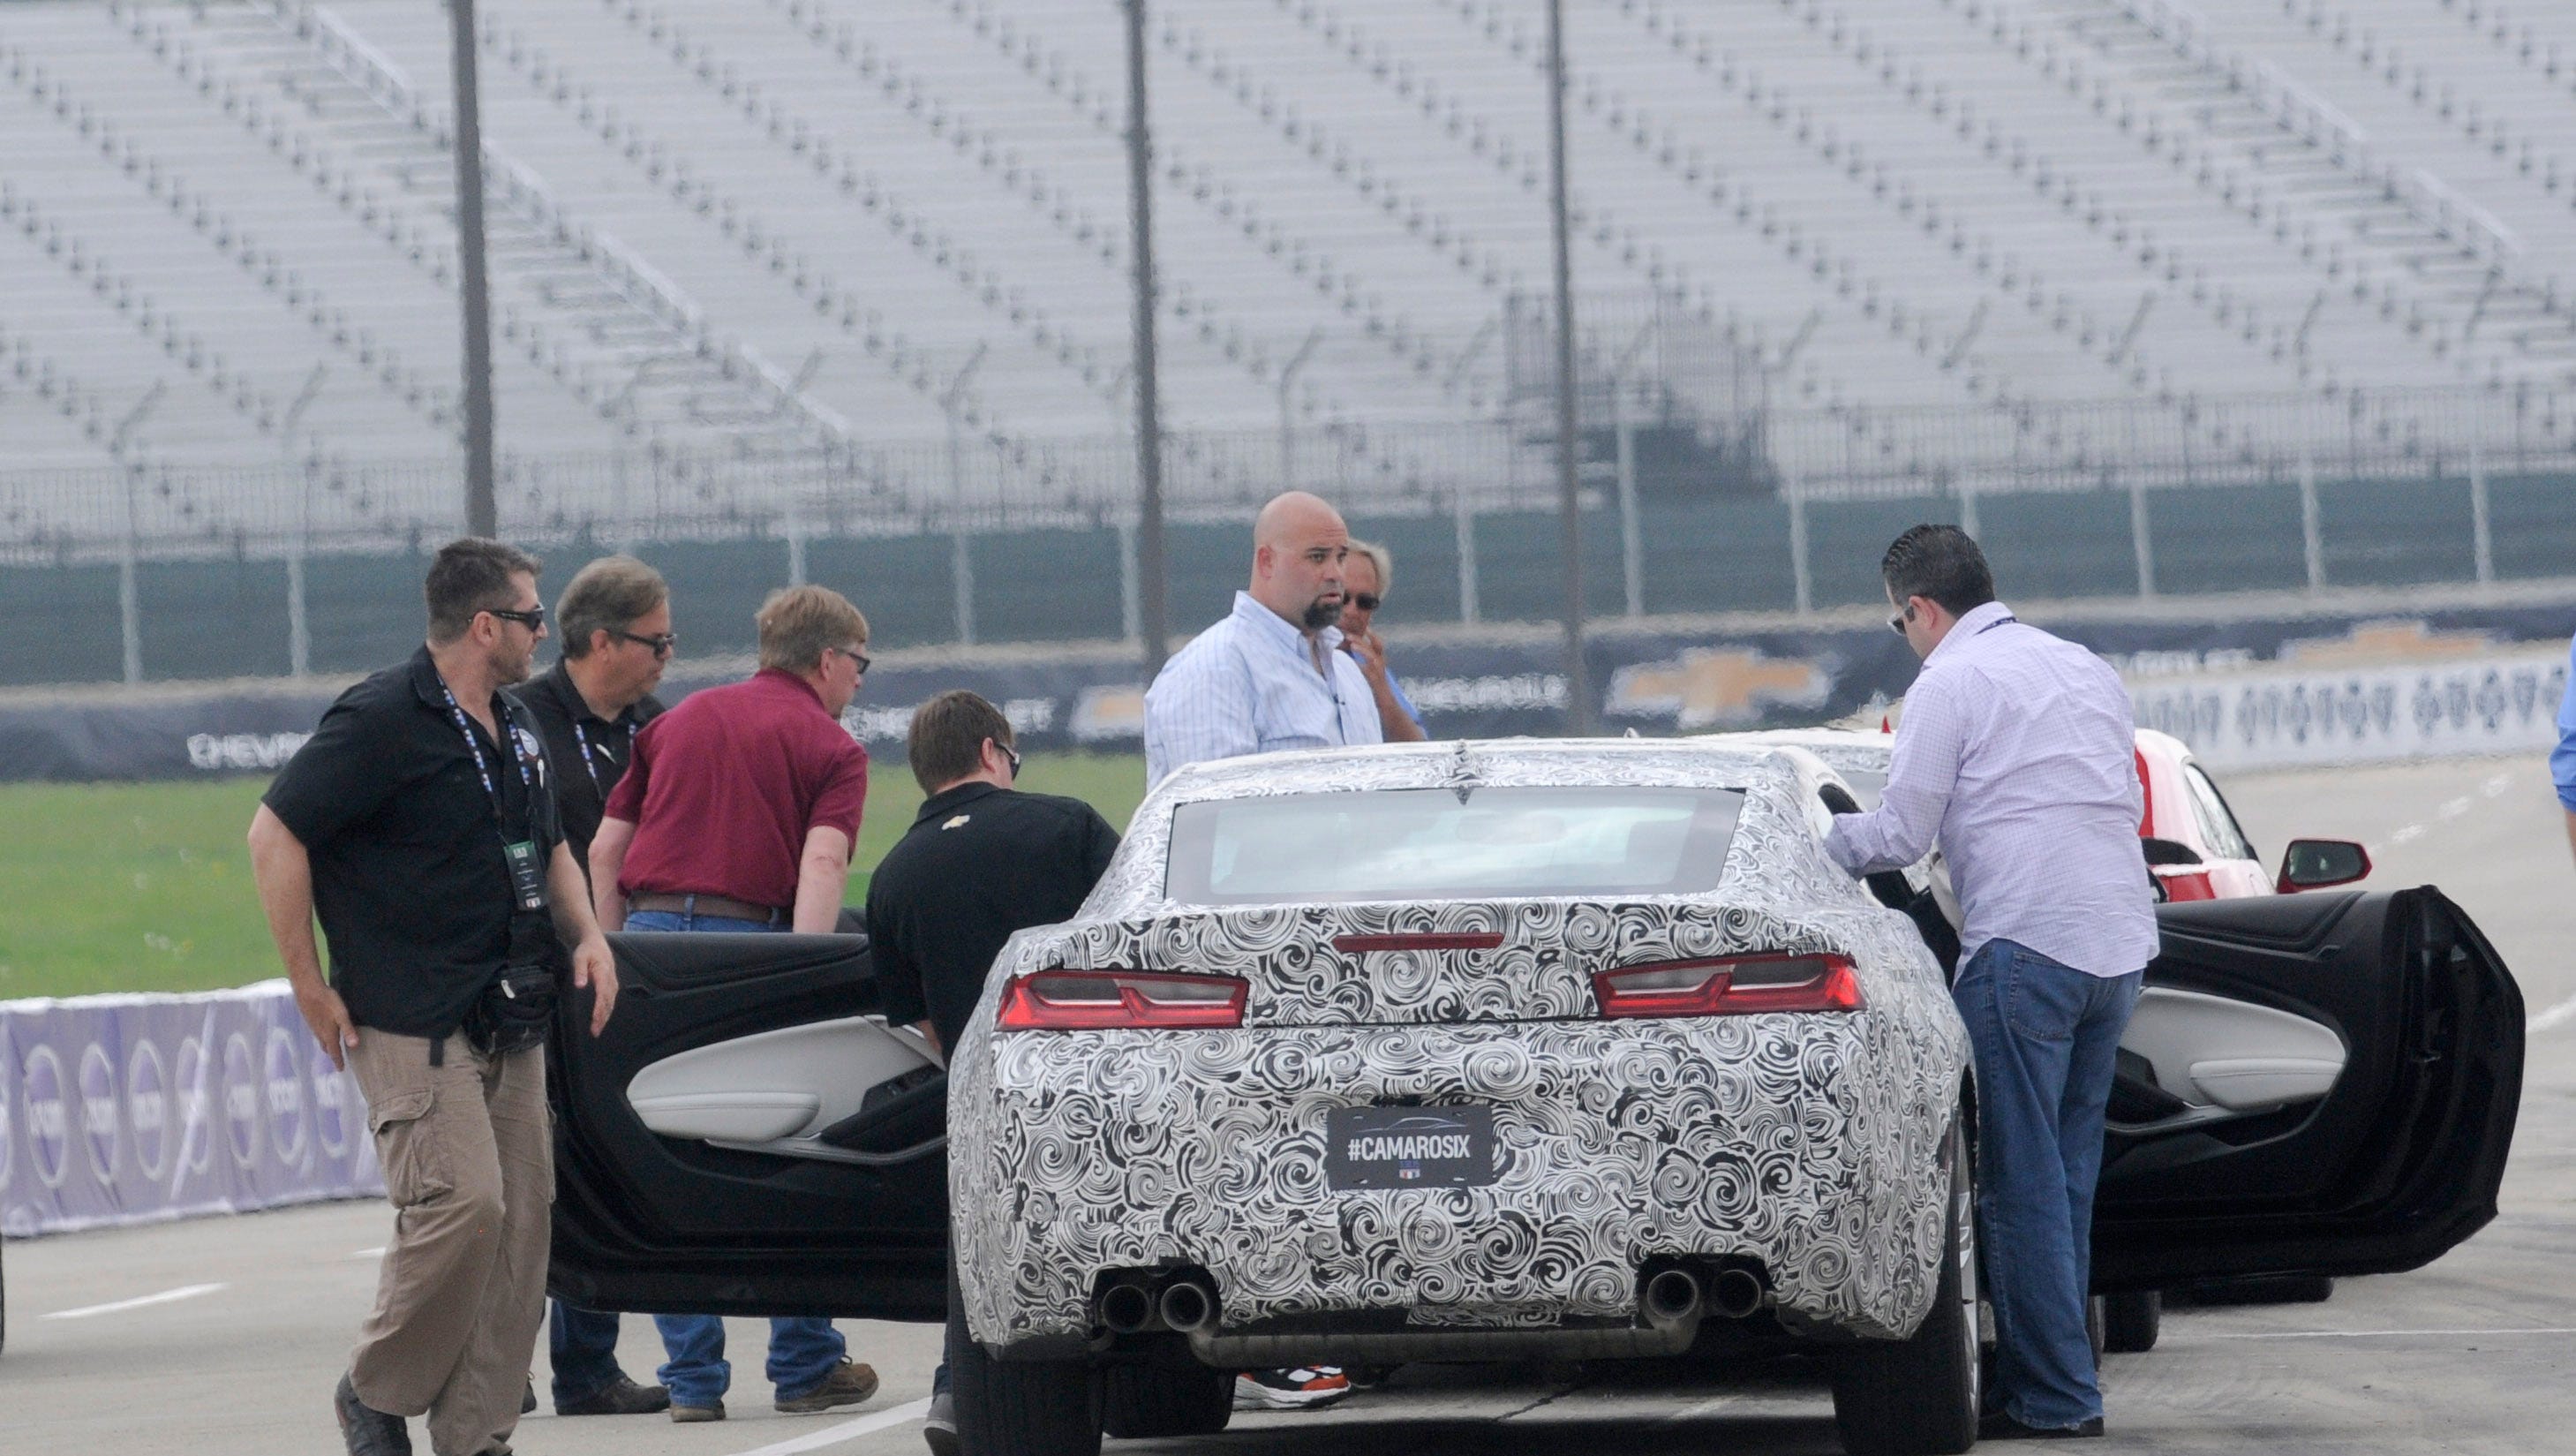 Media members prepare to enter the 2016 Camaro mule cars during a test day with the new Chevrolet Camaro on the Grand Prix track at Belle Isle.